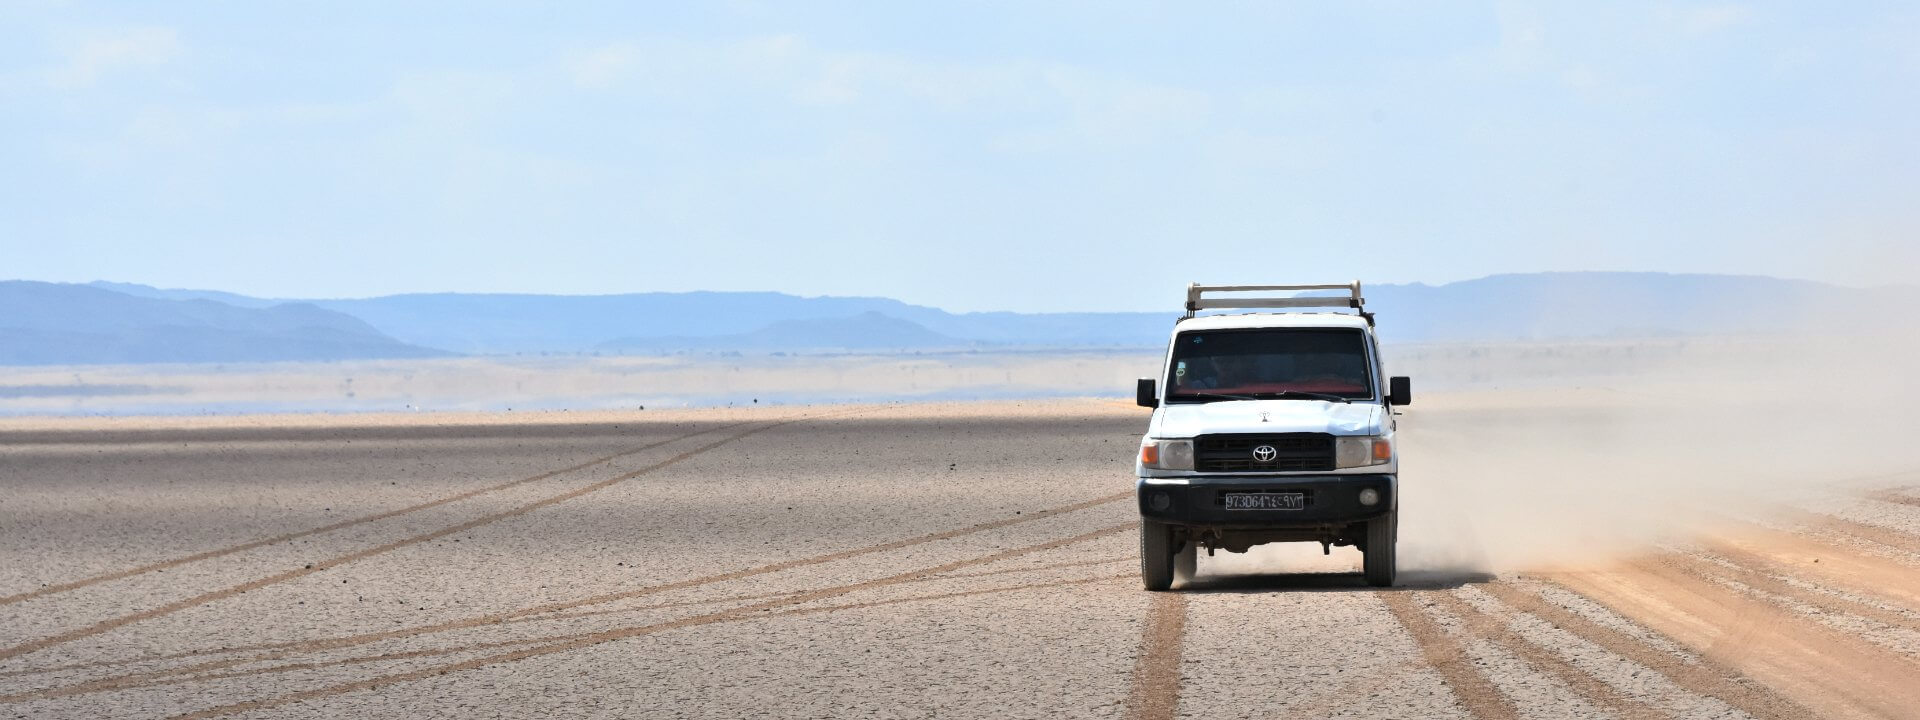 A single four-wheel drive vehicle crossing salt flats to illustrate remote holidays abroad